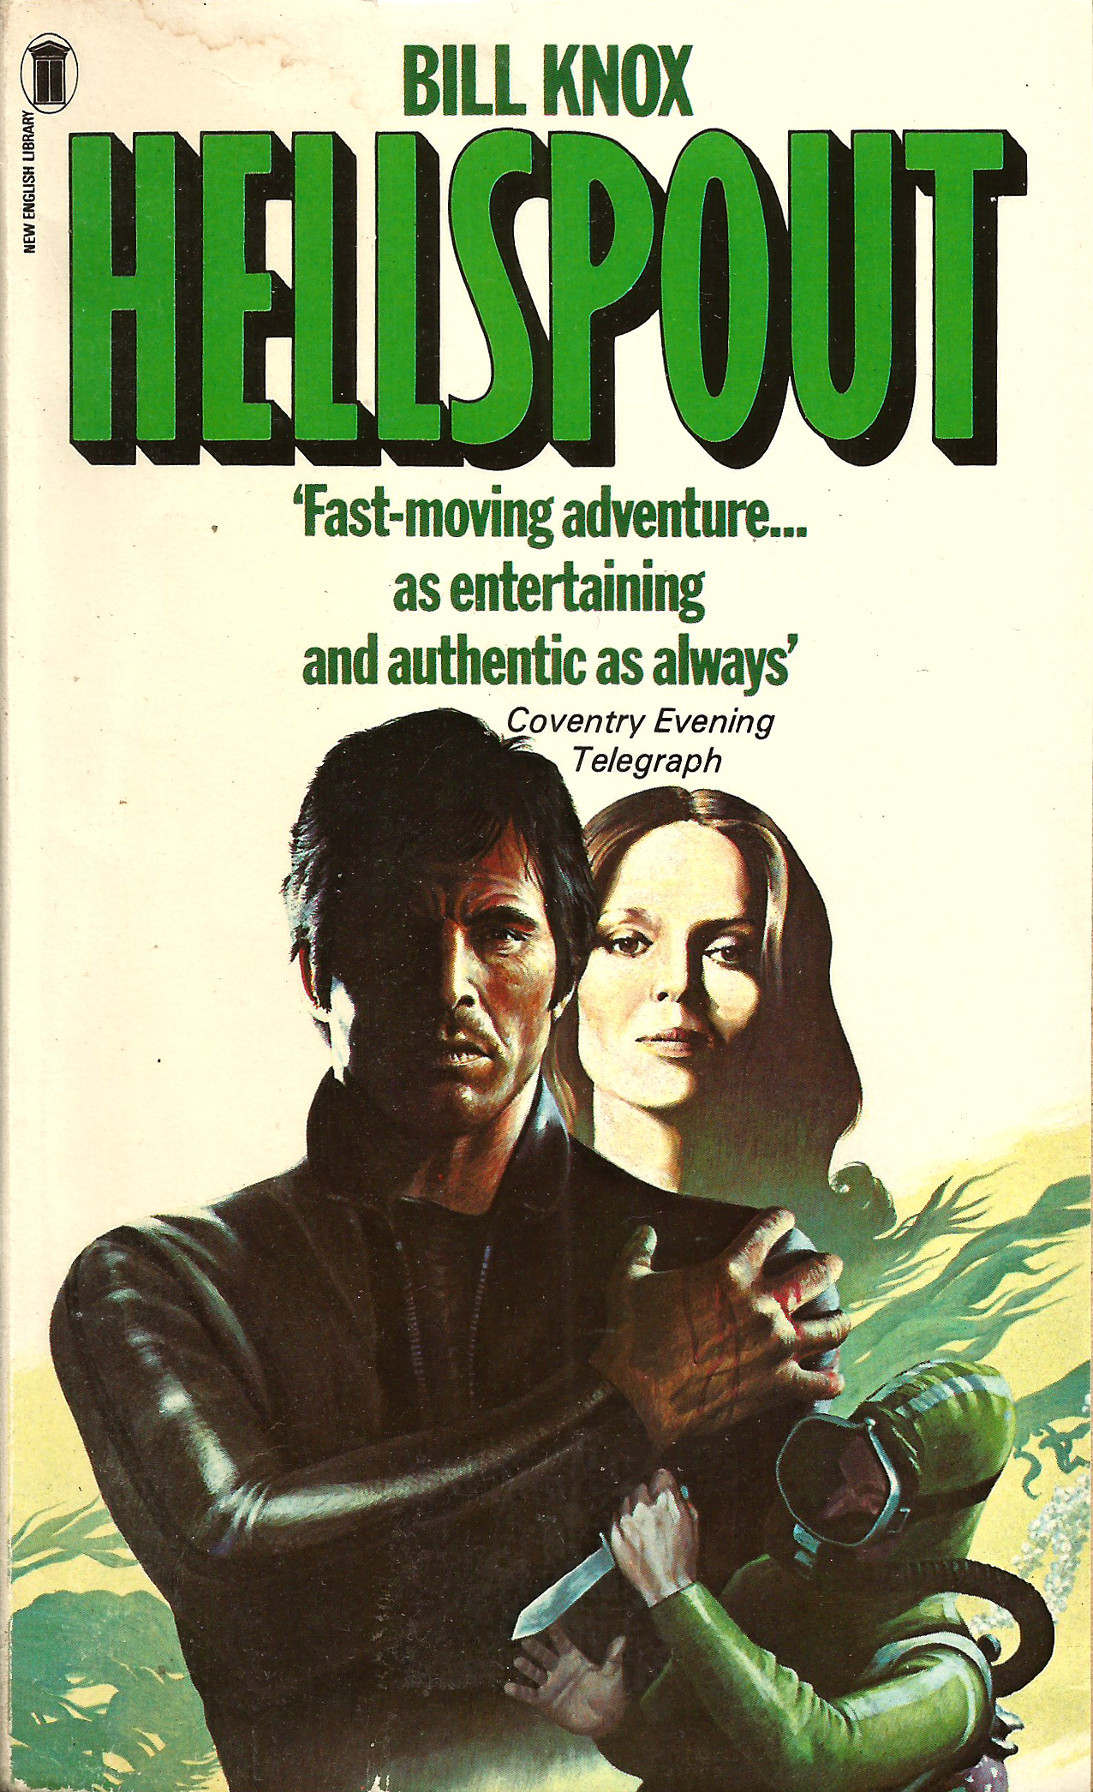 Hellspout, by Bill Knox (NEL, 1976). From a second-hand book shop in Clumber Park,